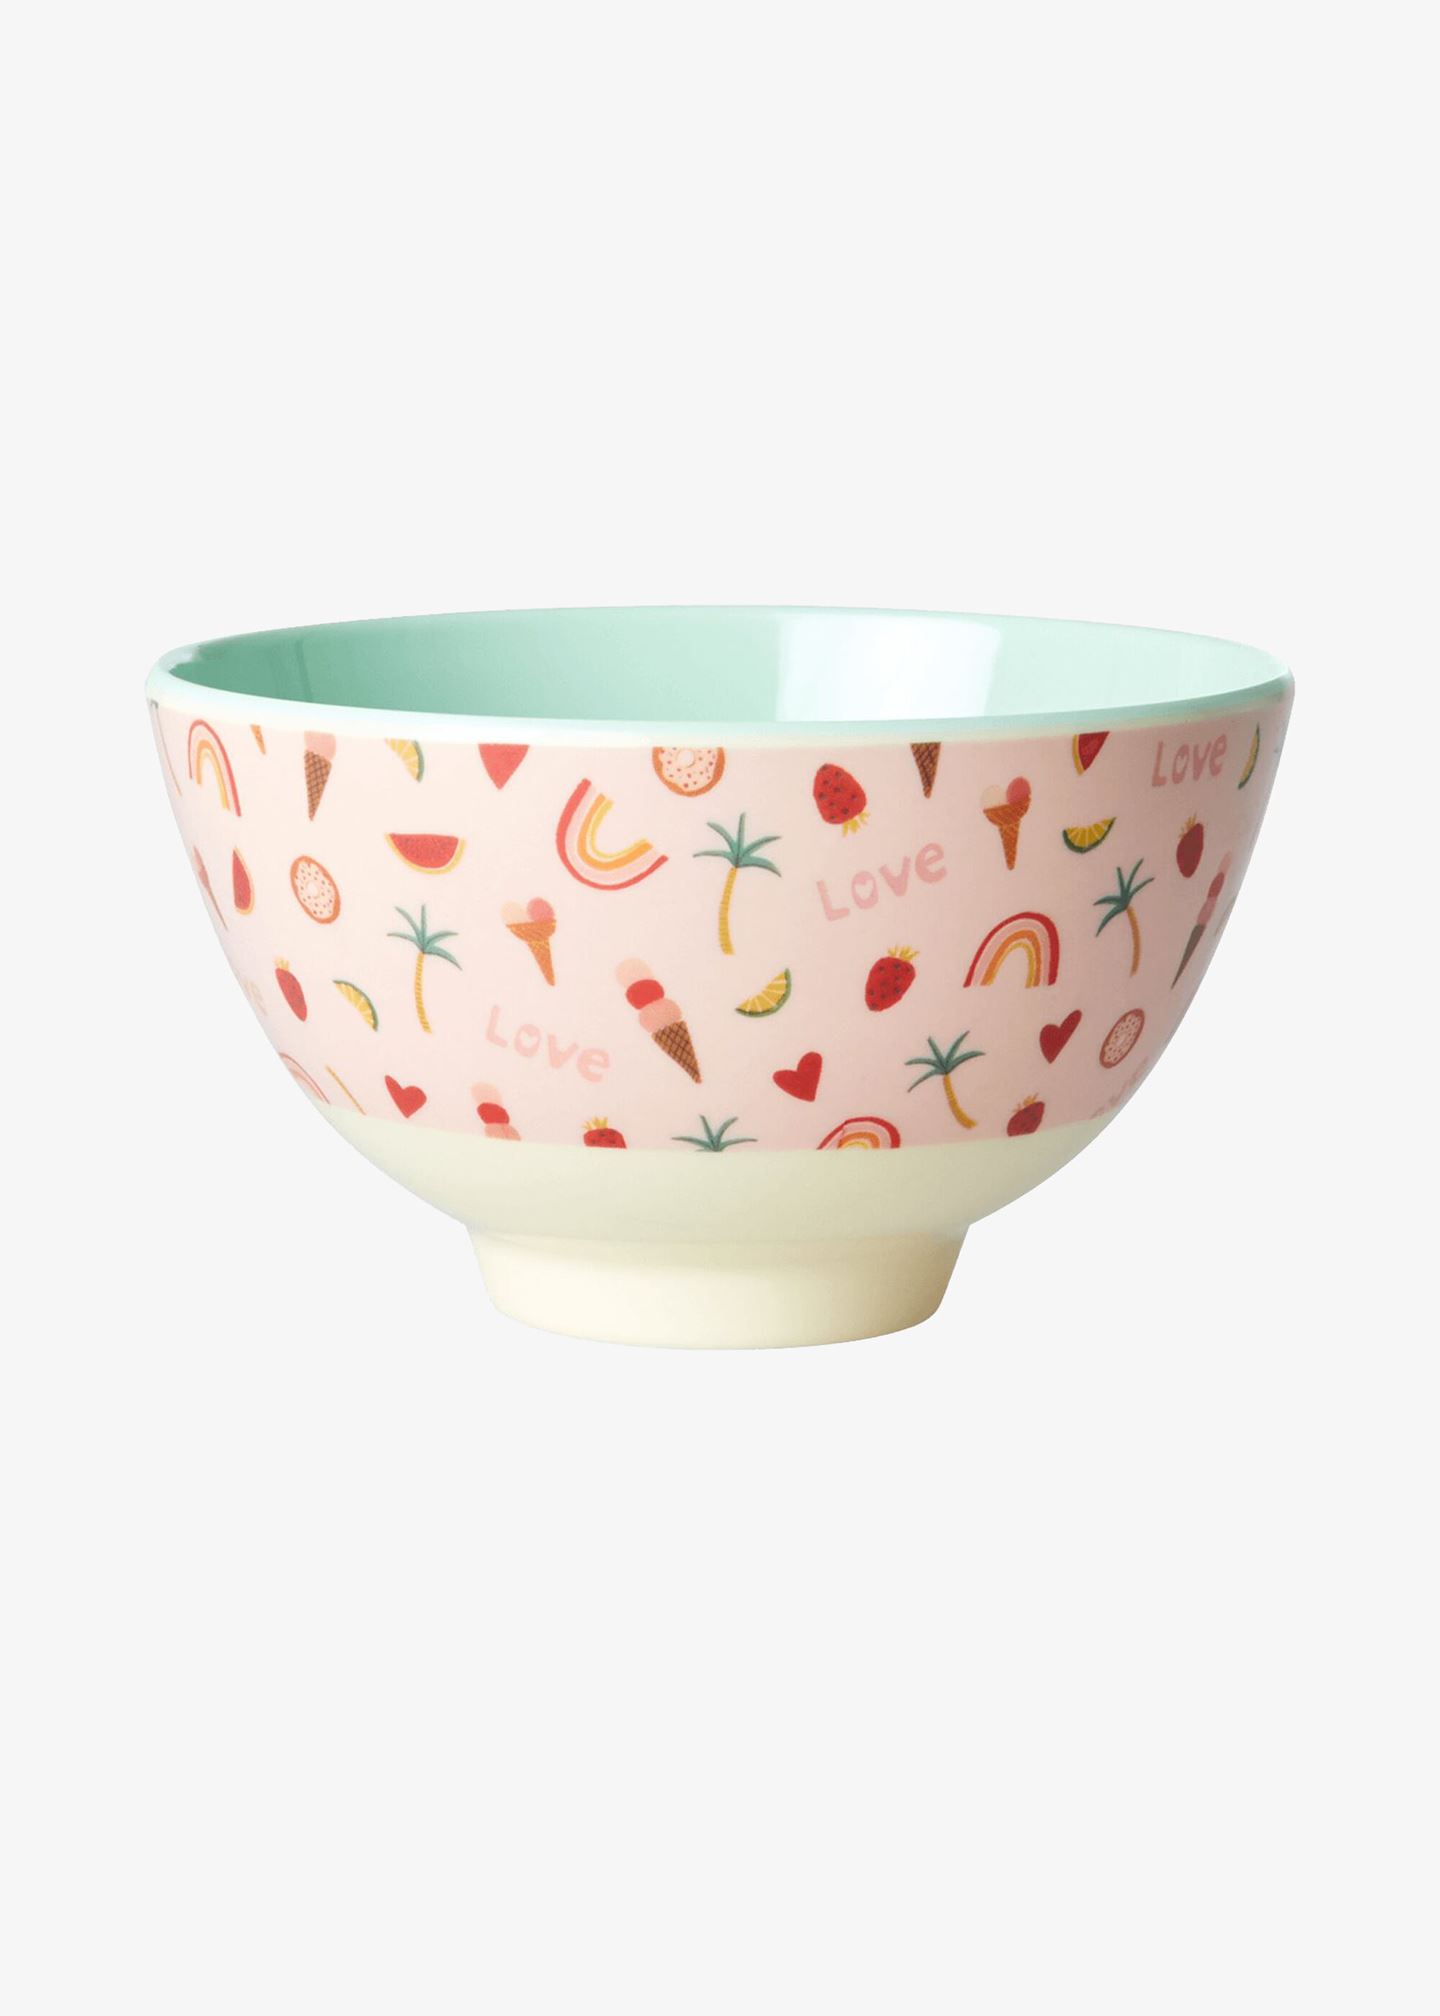 SMALL MELAMINE BOWL - SMALL FLOWERS AND CHERRY PRINT